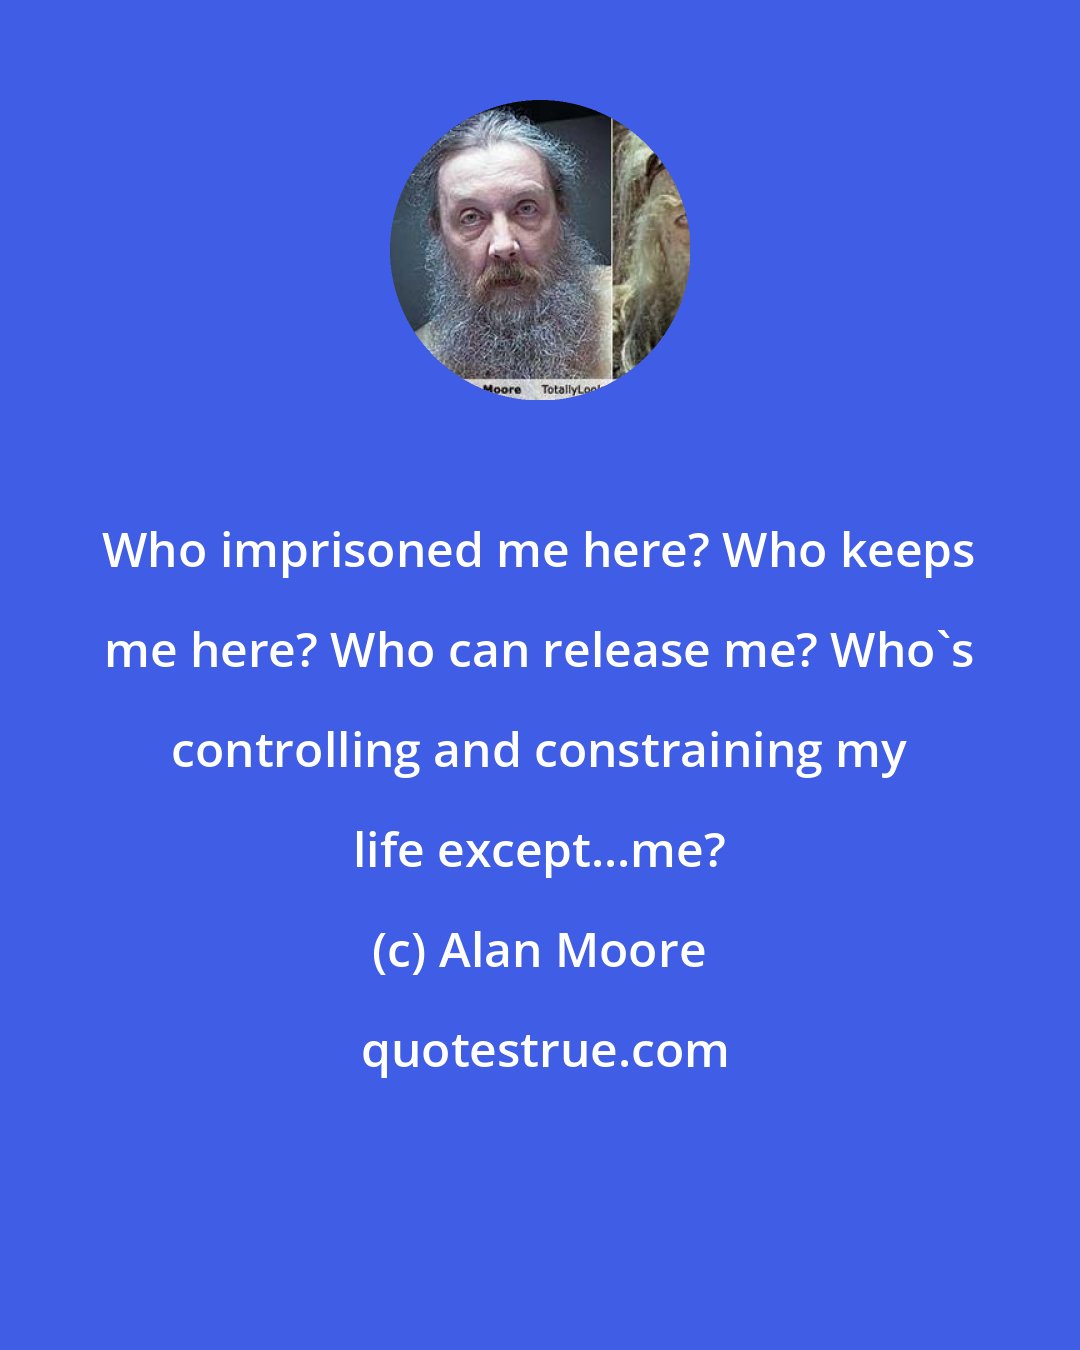 Alan Moore: Who imprisoned me here? Who keeps me here? Who can release me? Who's controlling and constraining my life except...me?